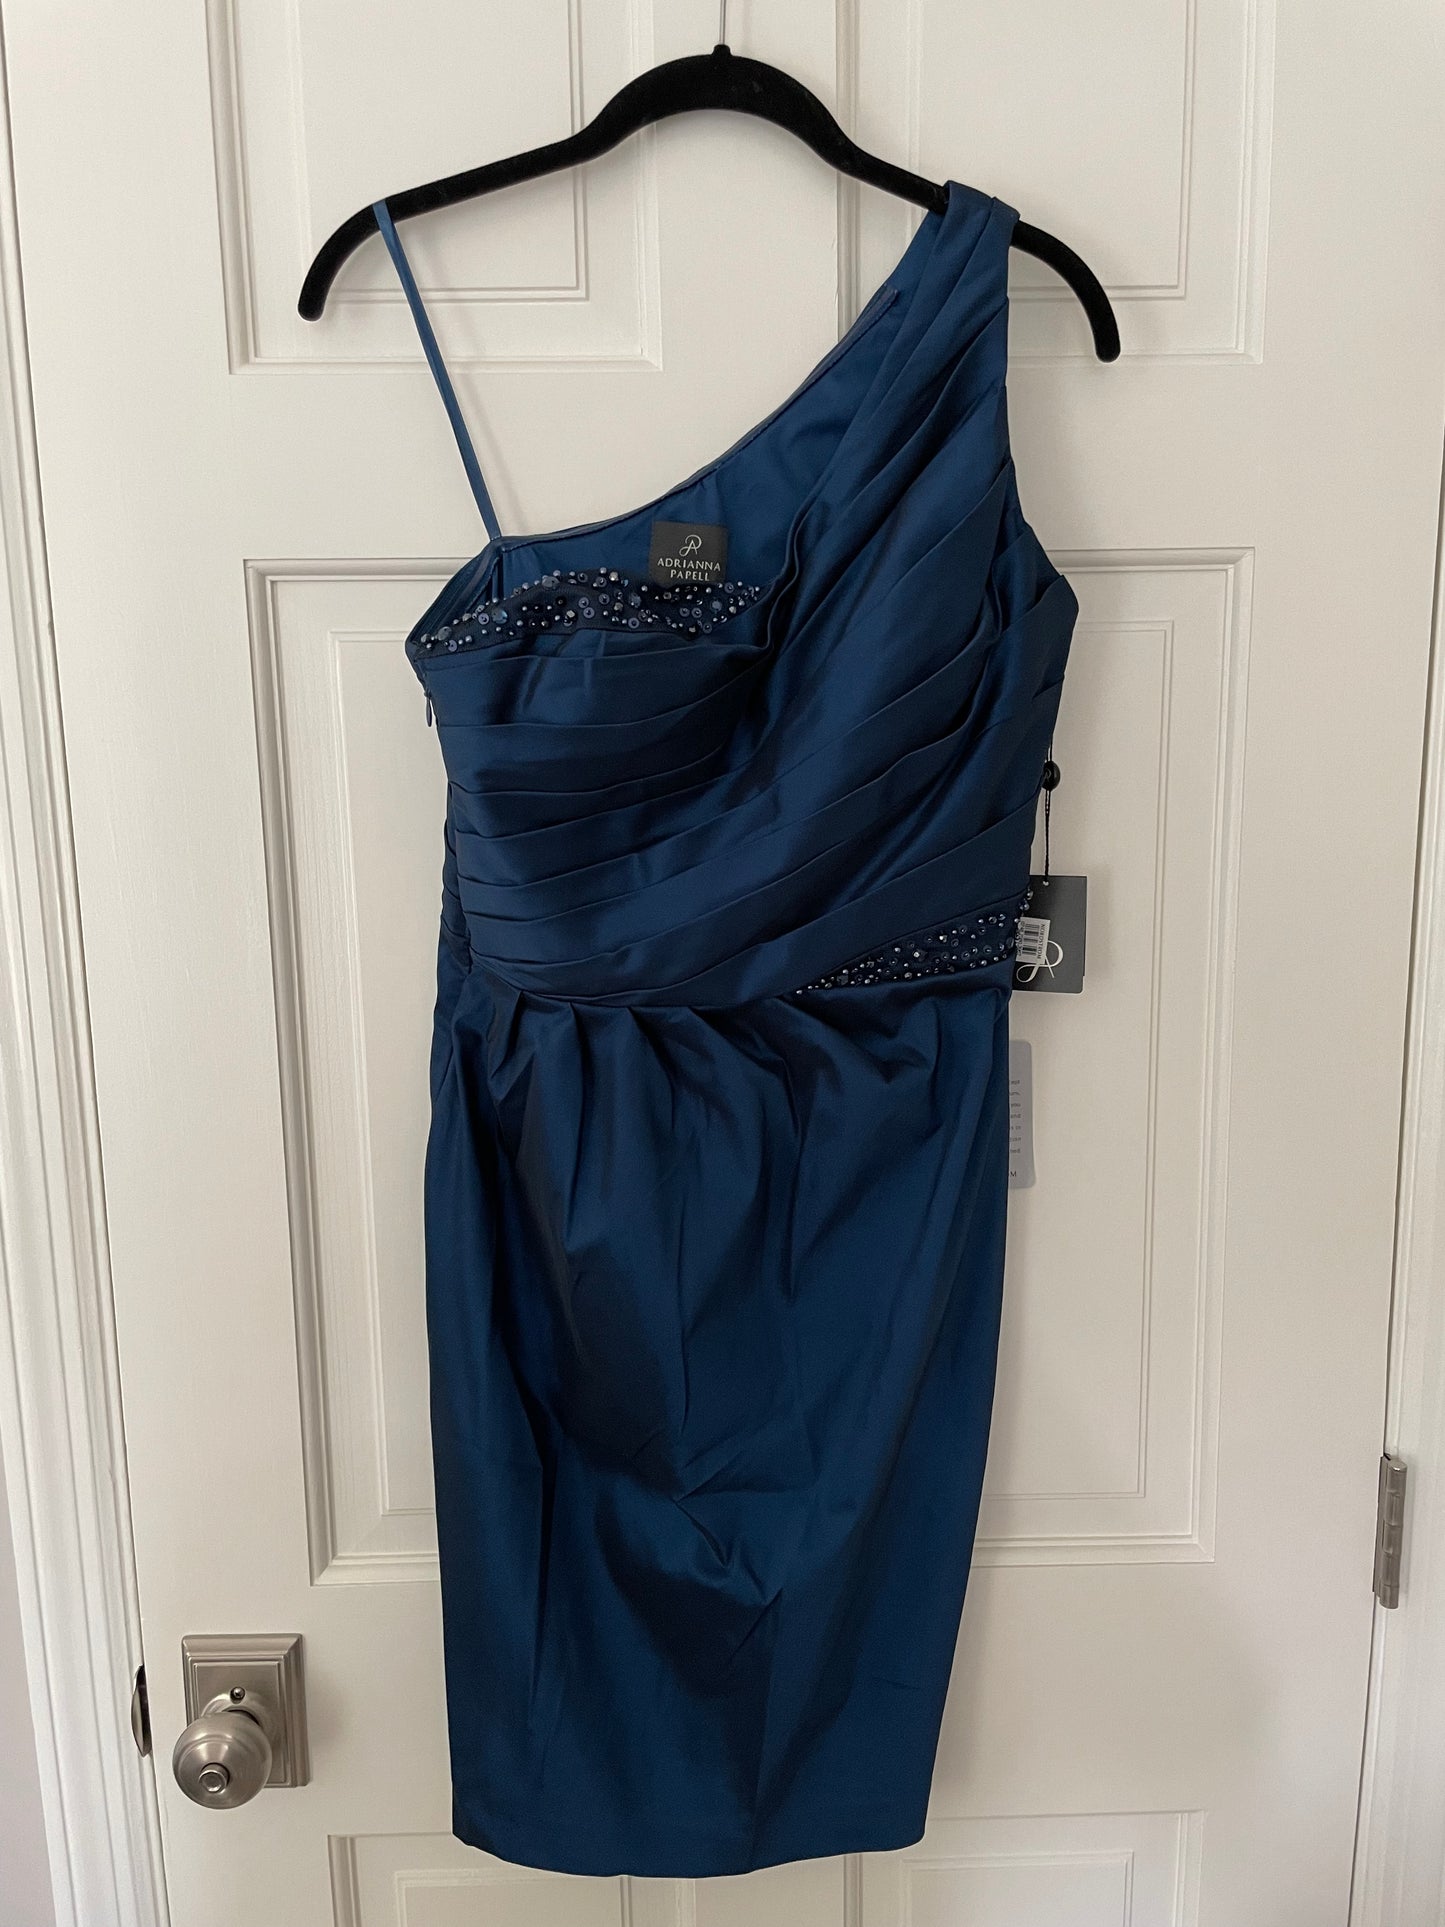 One Shoulder Adrianna Pappel Dress, NWT, size 6